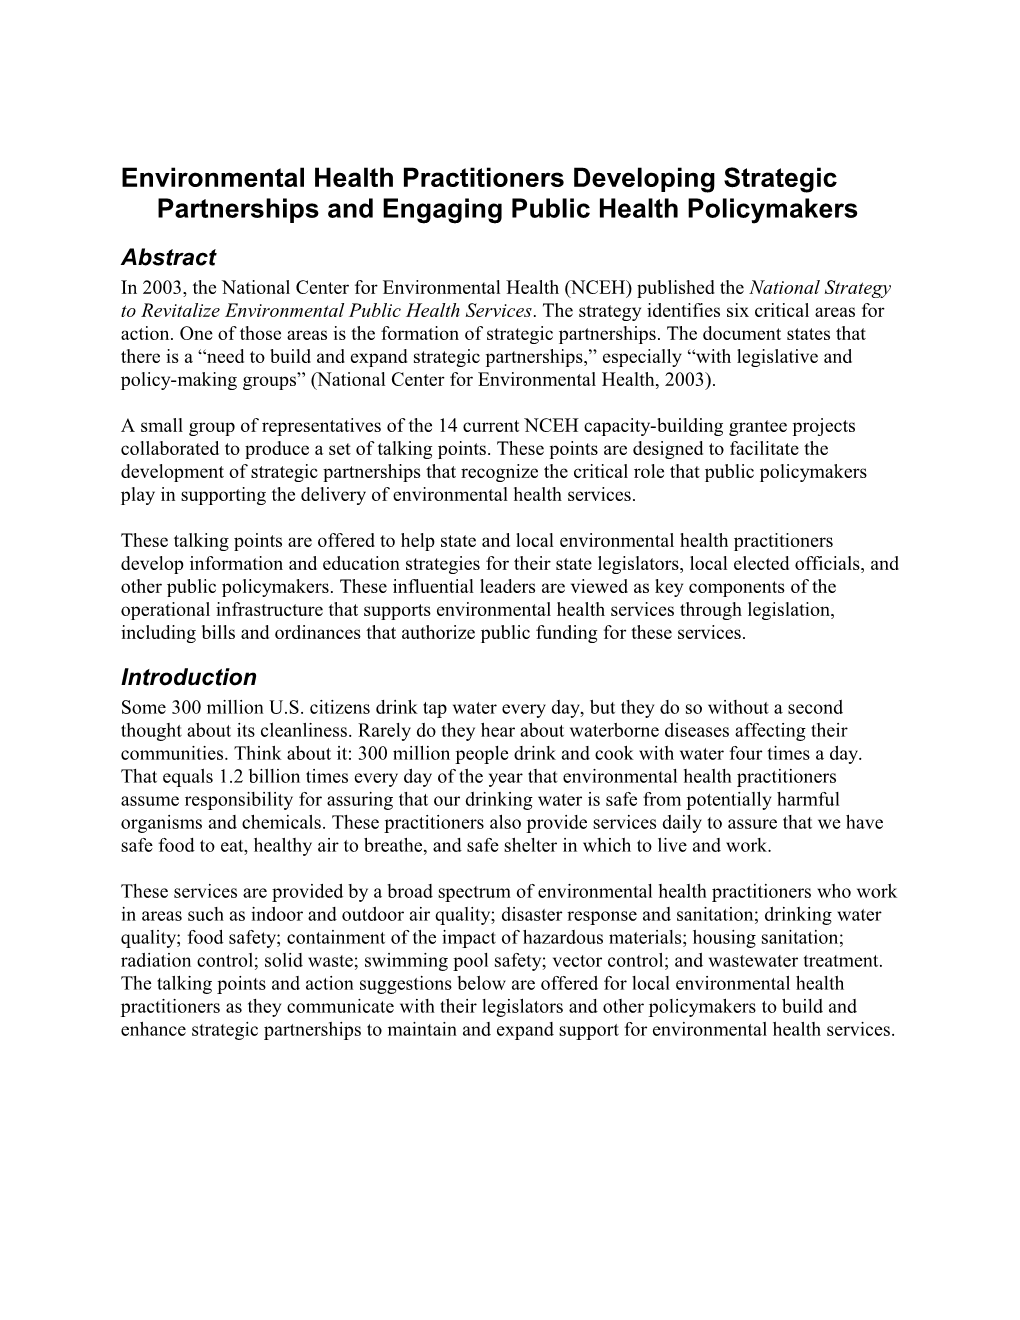 Value and Benefits of Environmental Health Services